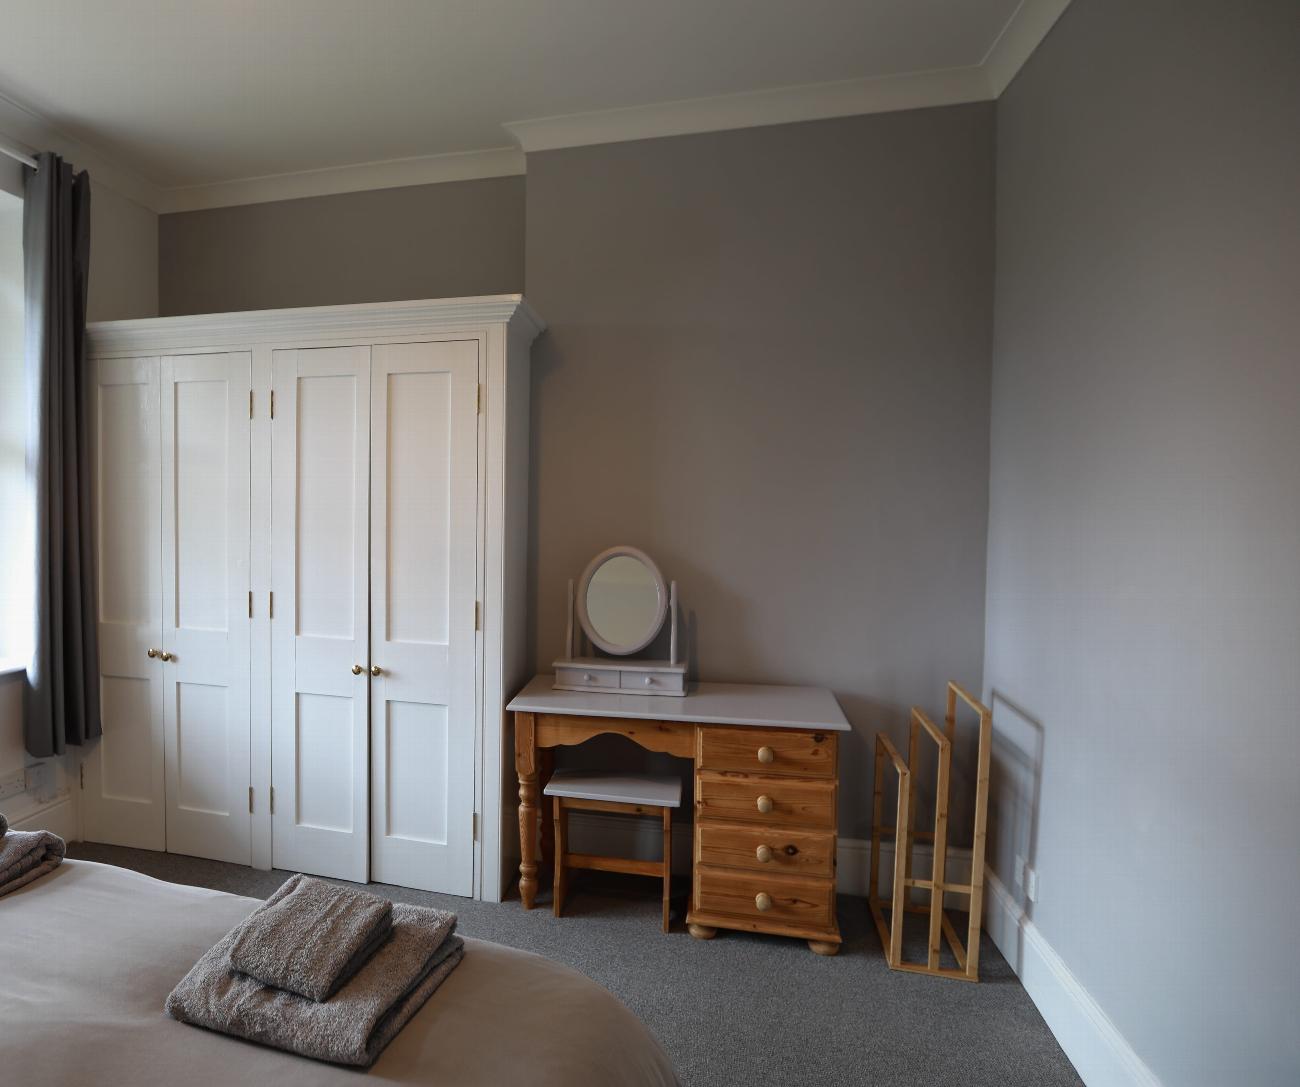 Self-Catering Accommodation in Bideford | Woodside Apartments gallery image 11